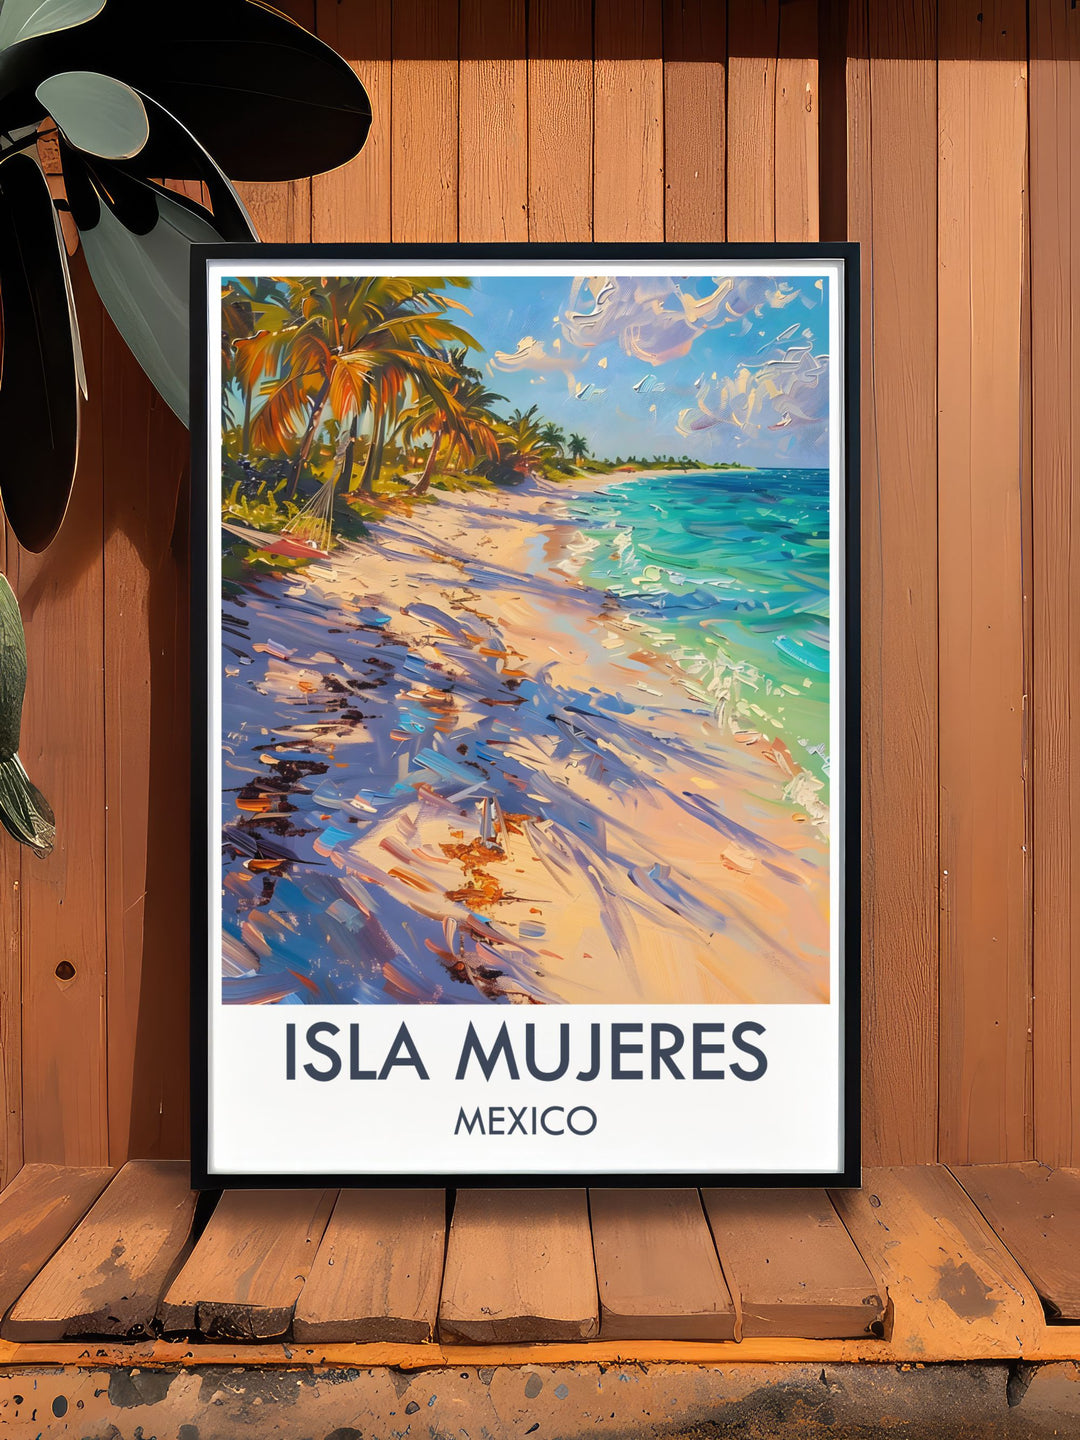 Fine art print of Isla Mujeres, showcasing its serene beaches and vibrant marine life, ideal for adding a touch of tropical elegance to your home decor.